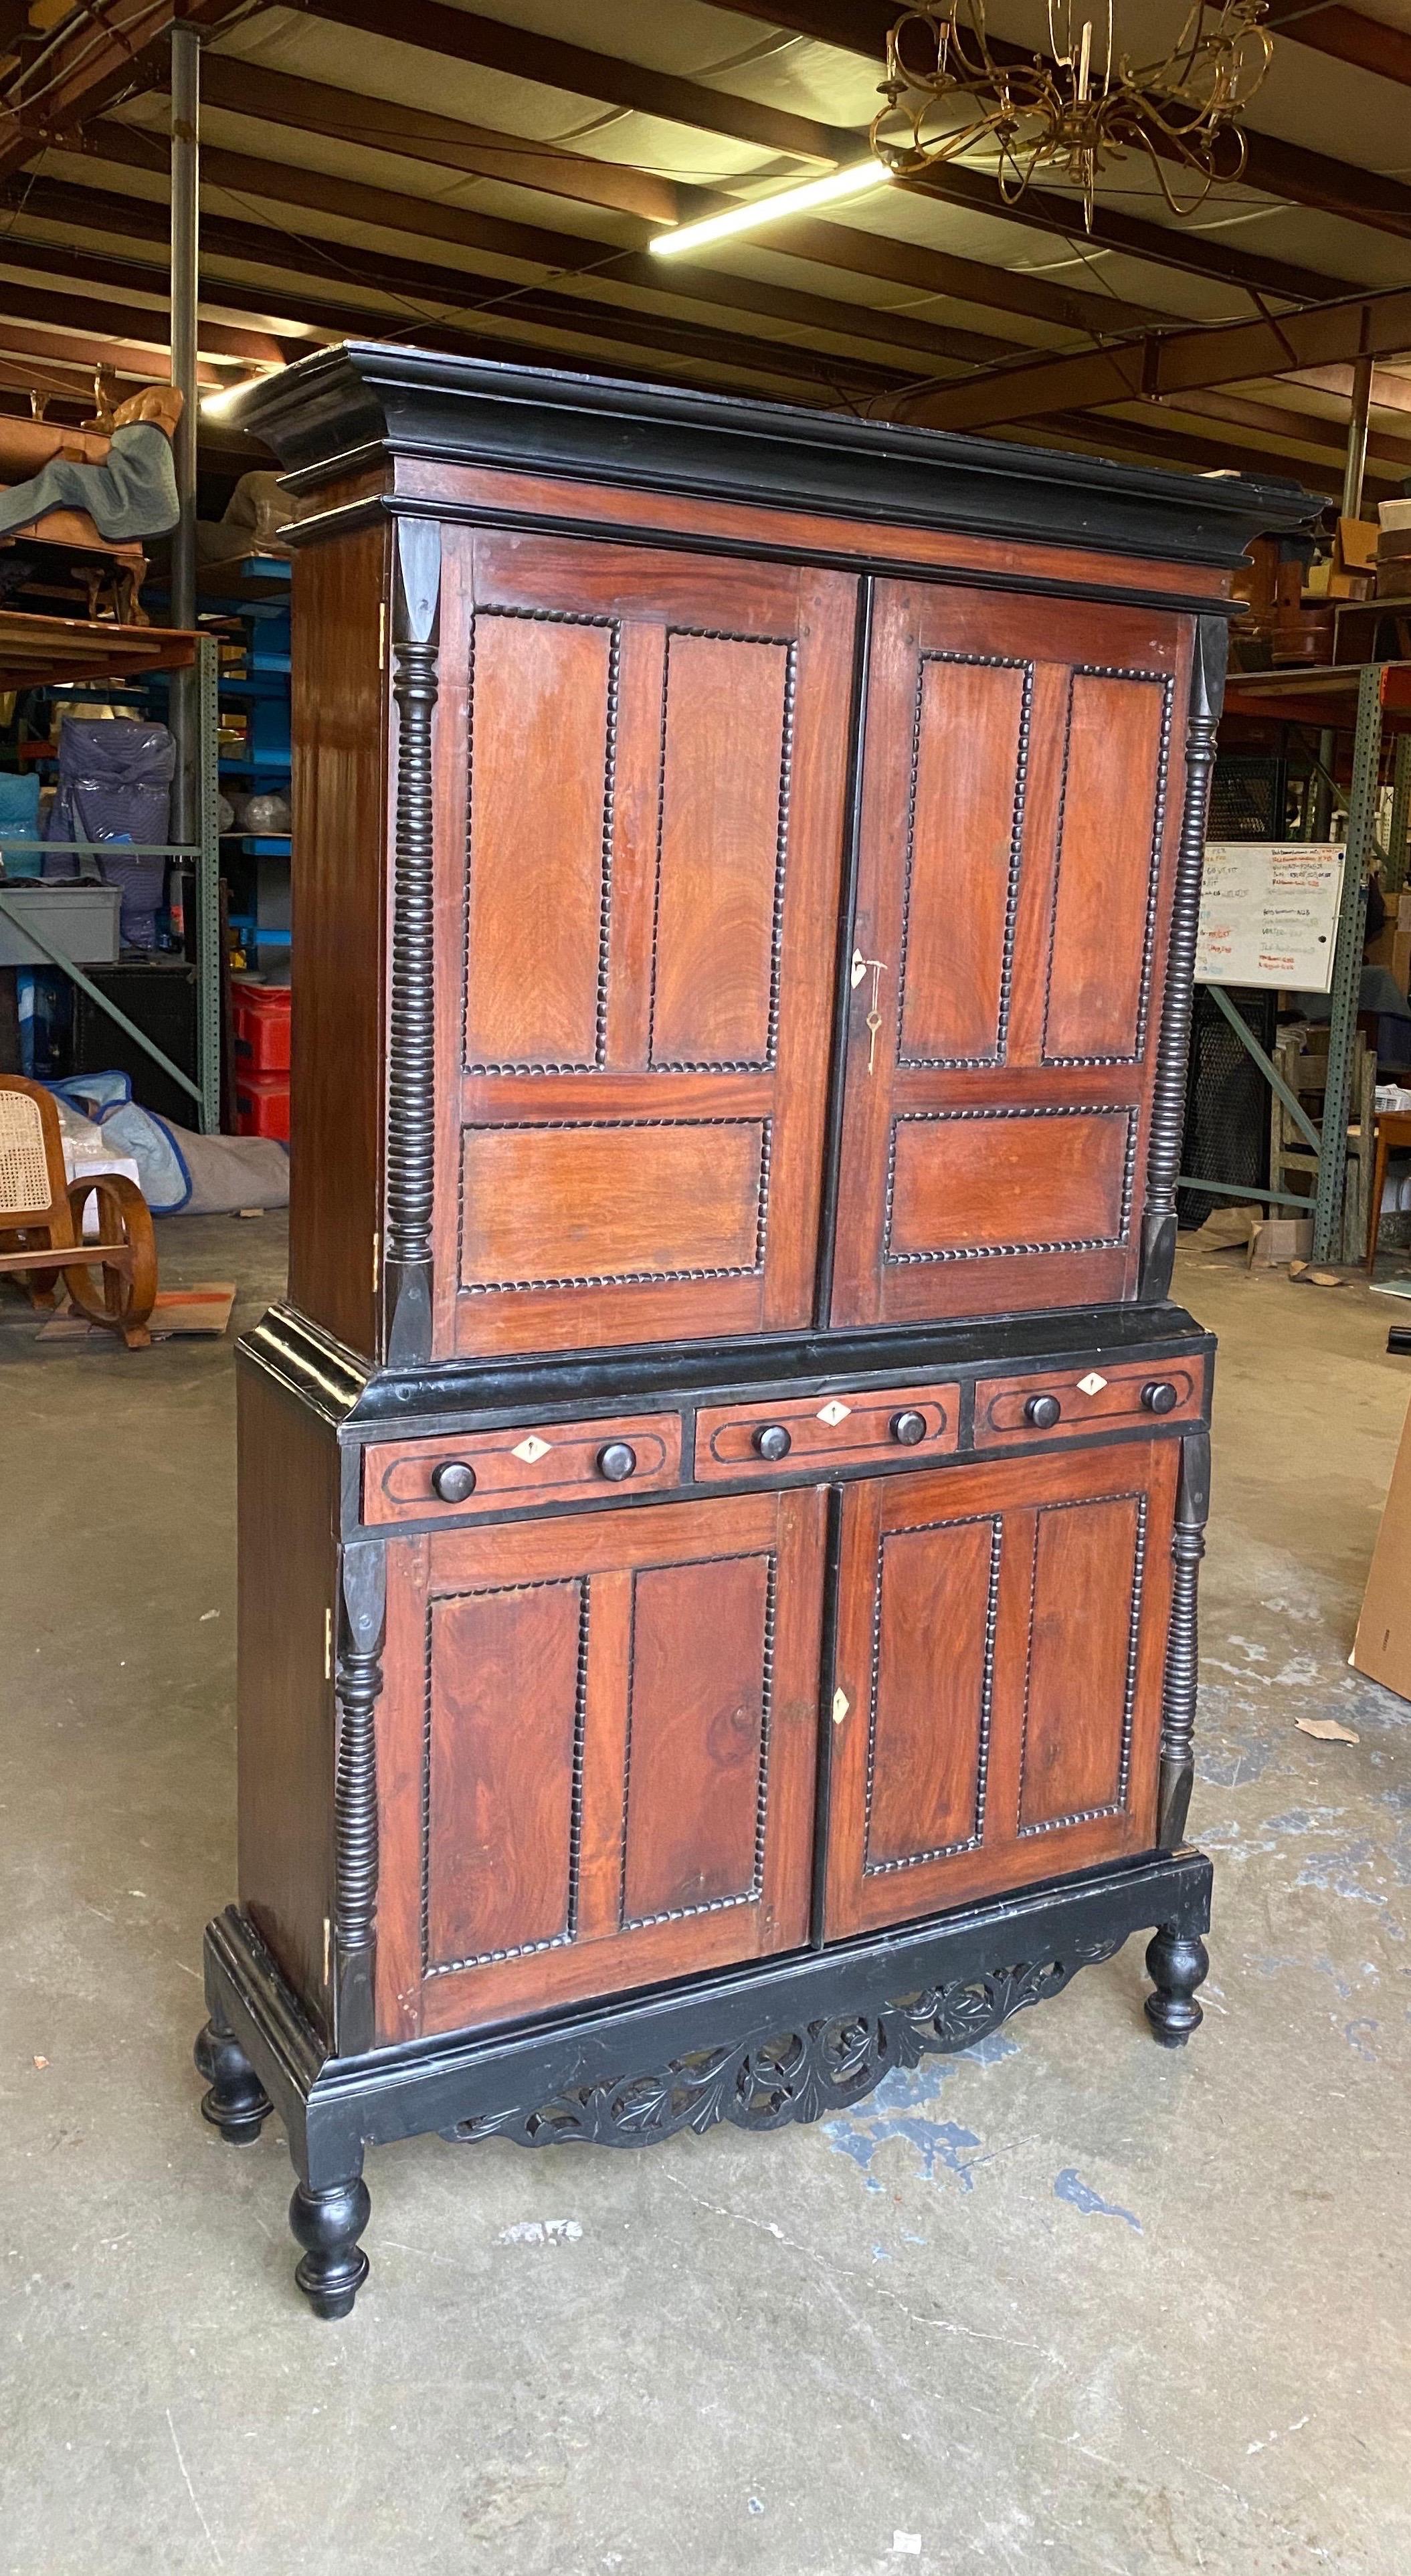 19th century Anglo-Indian jackwood and ebony cabinet. Dutch colonial era from Ceylon. Two part cabinet resting on ebonized base (3 parts).